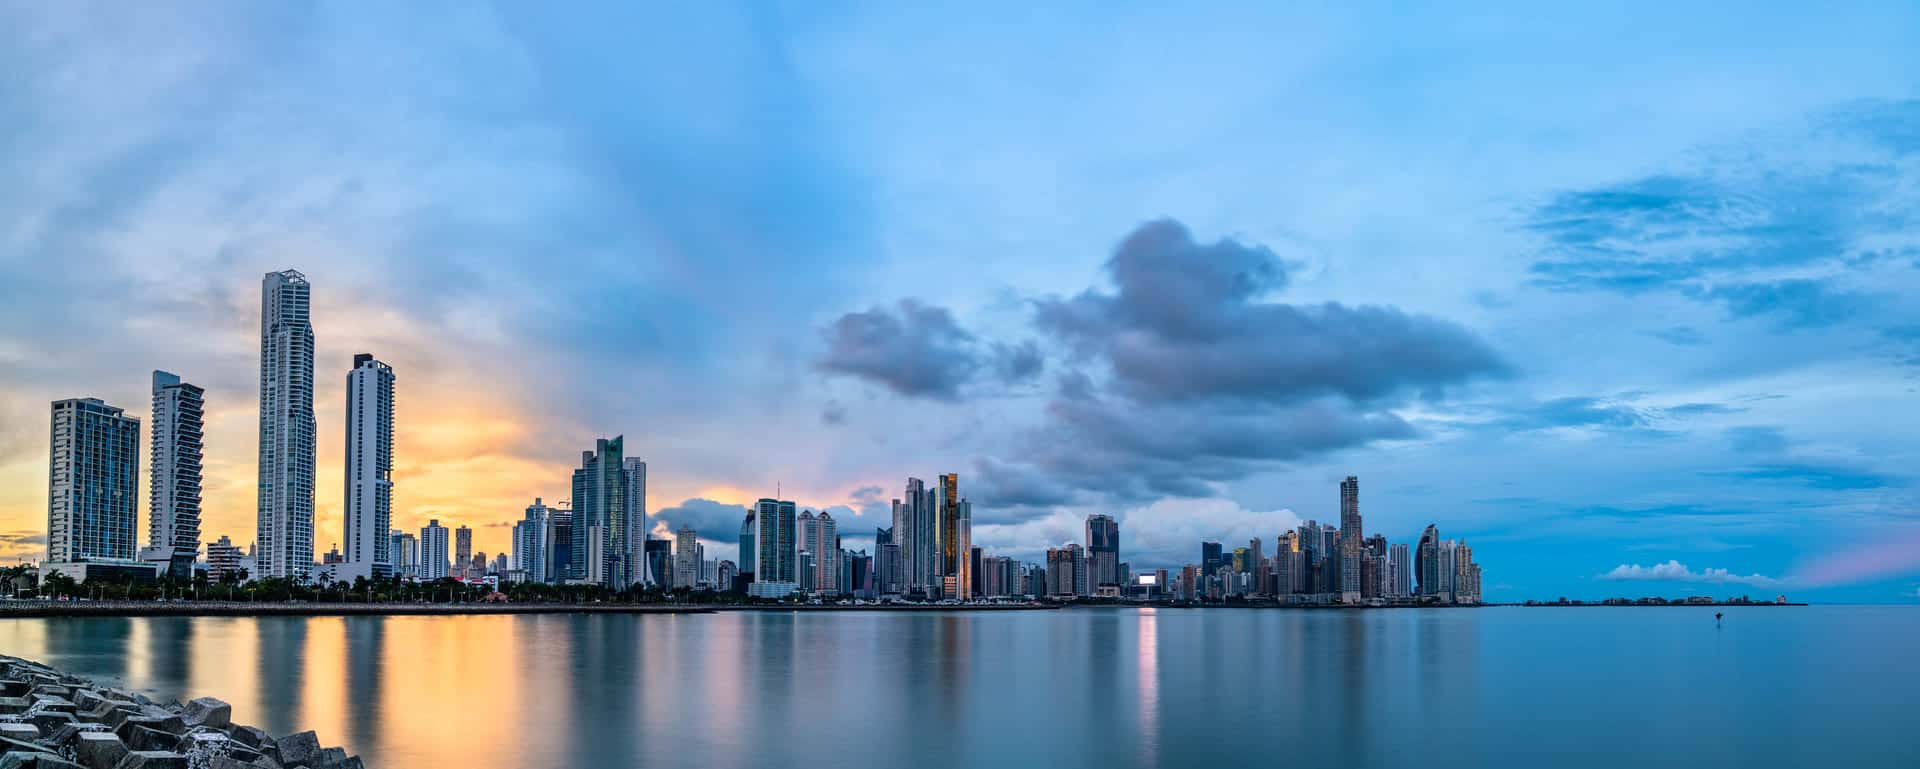 Mexico vs Panama – The Ultimate Expat Guide